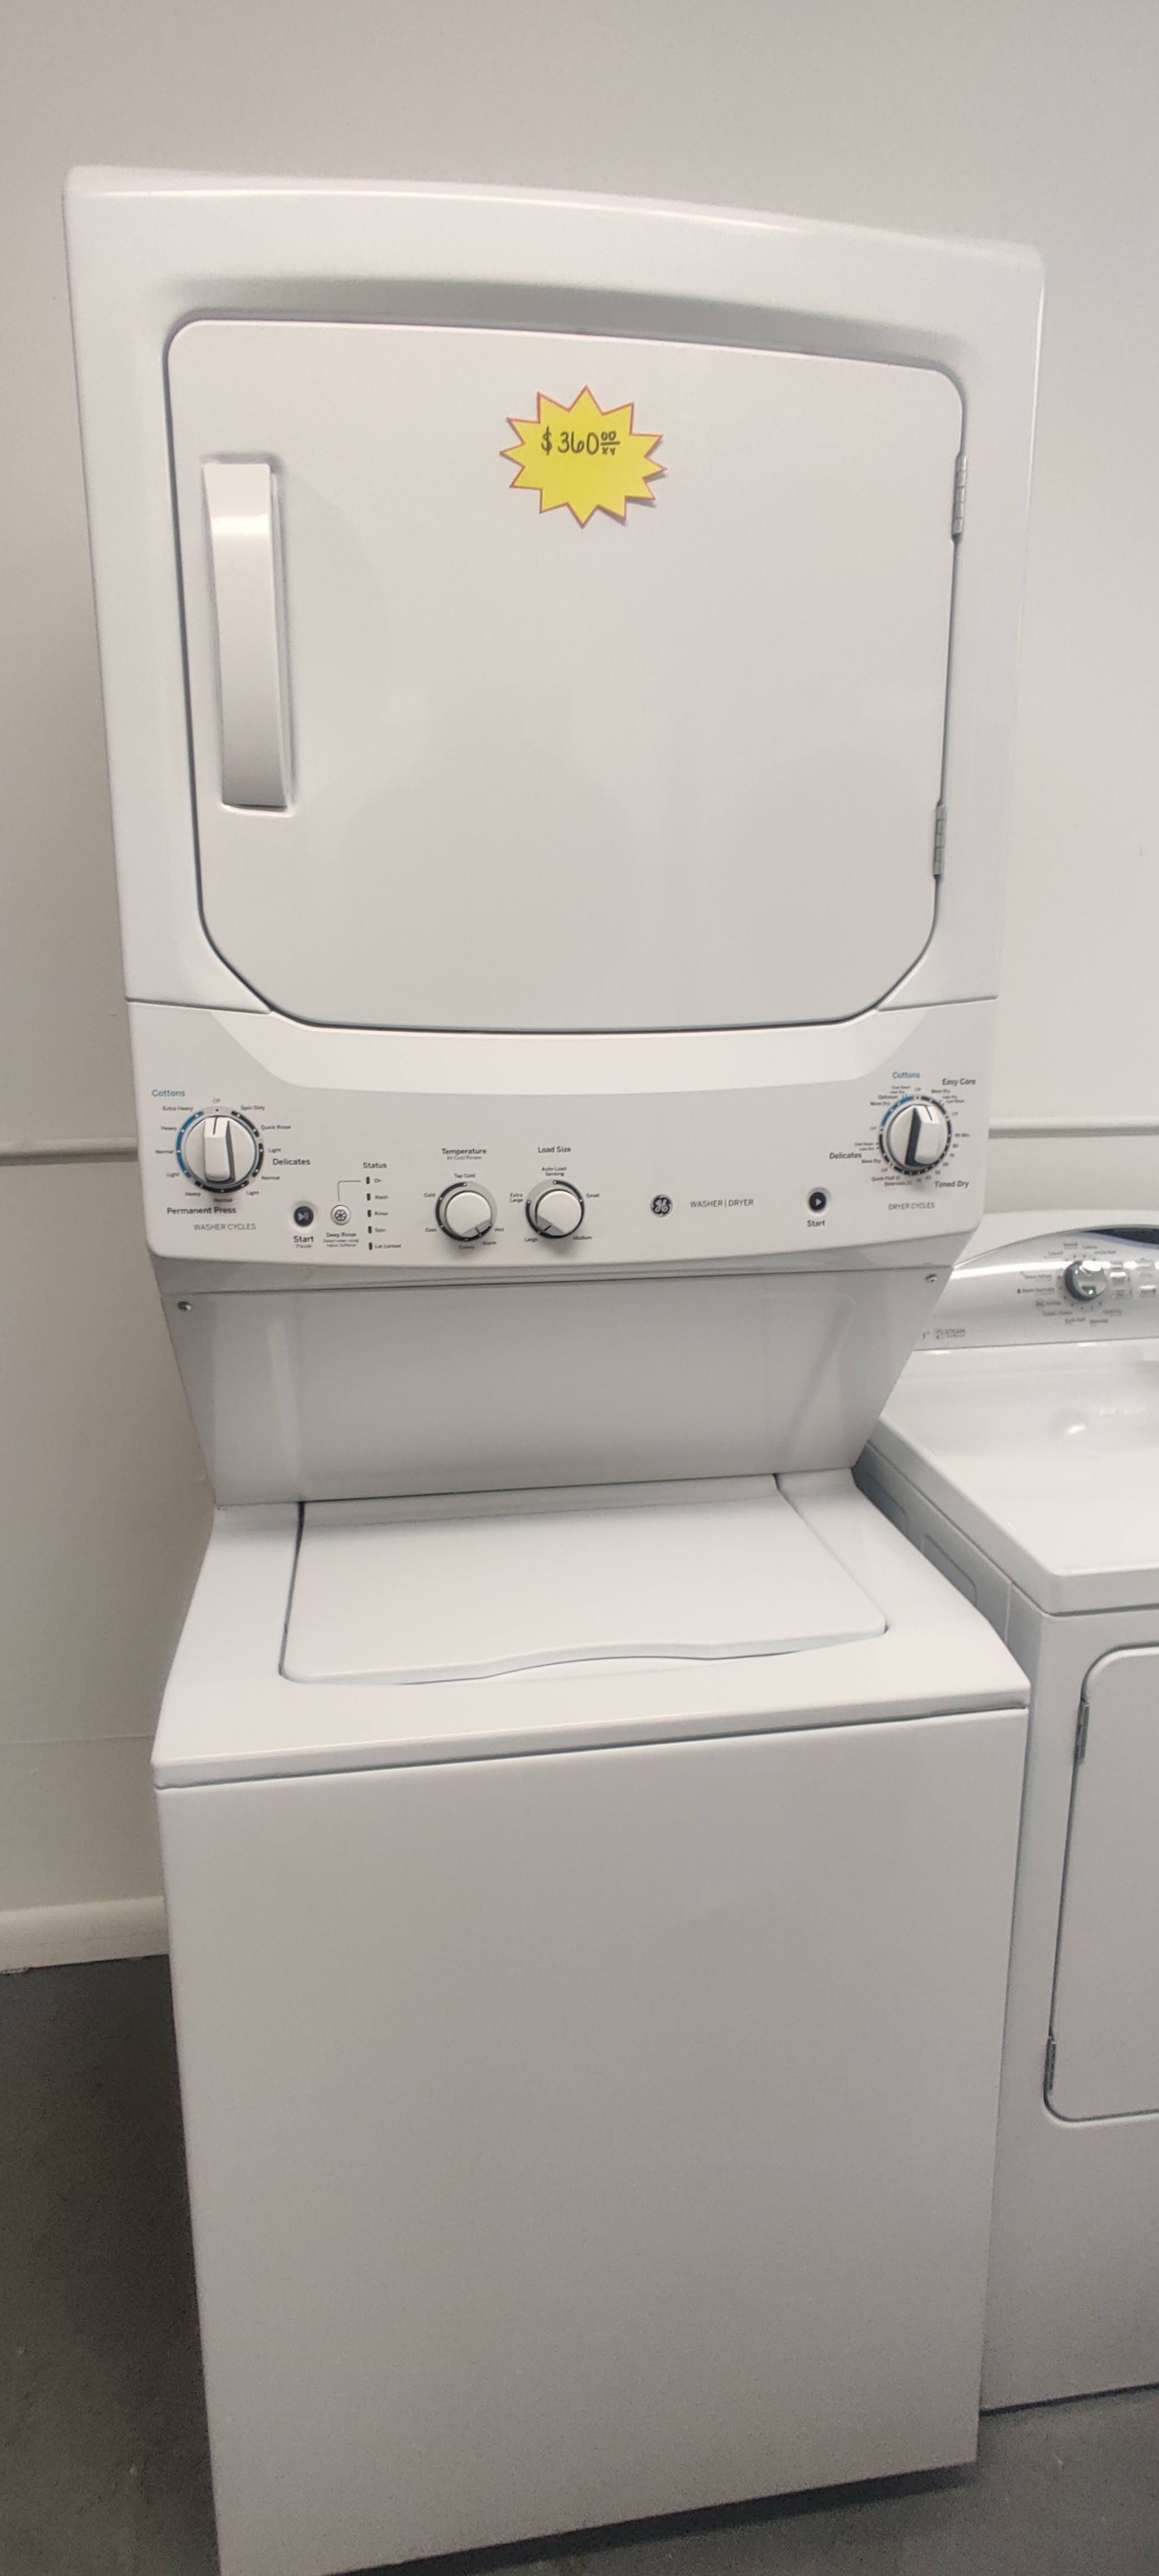 GE 27" WASHER/DRYER COMBO